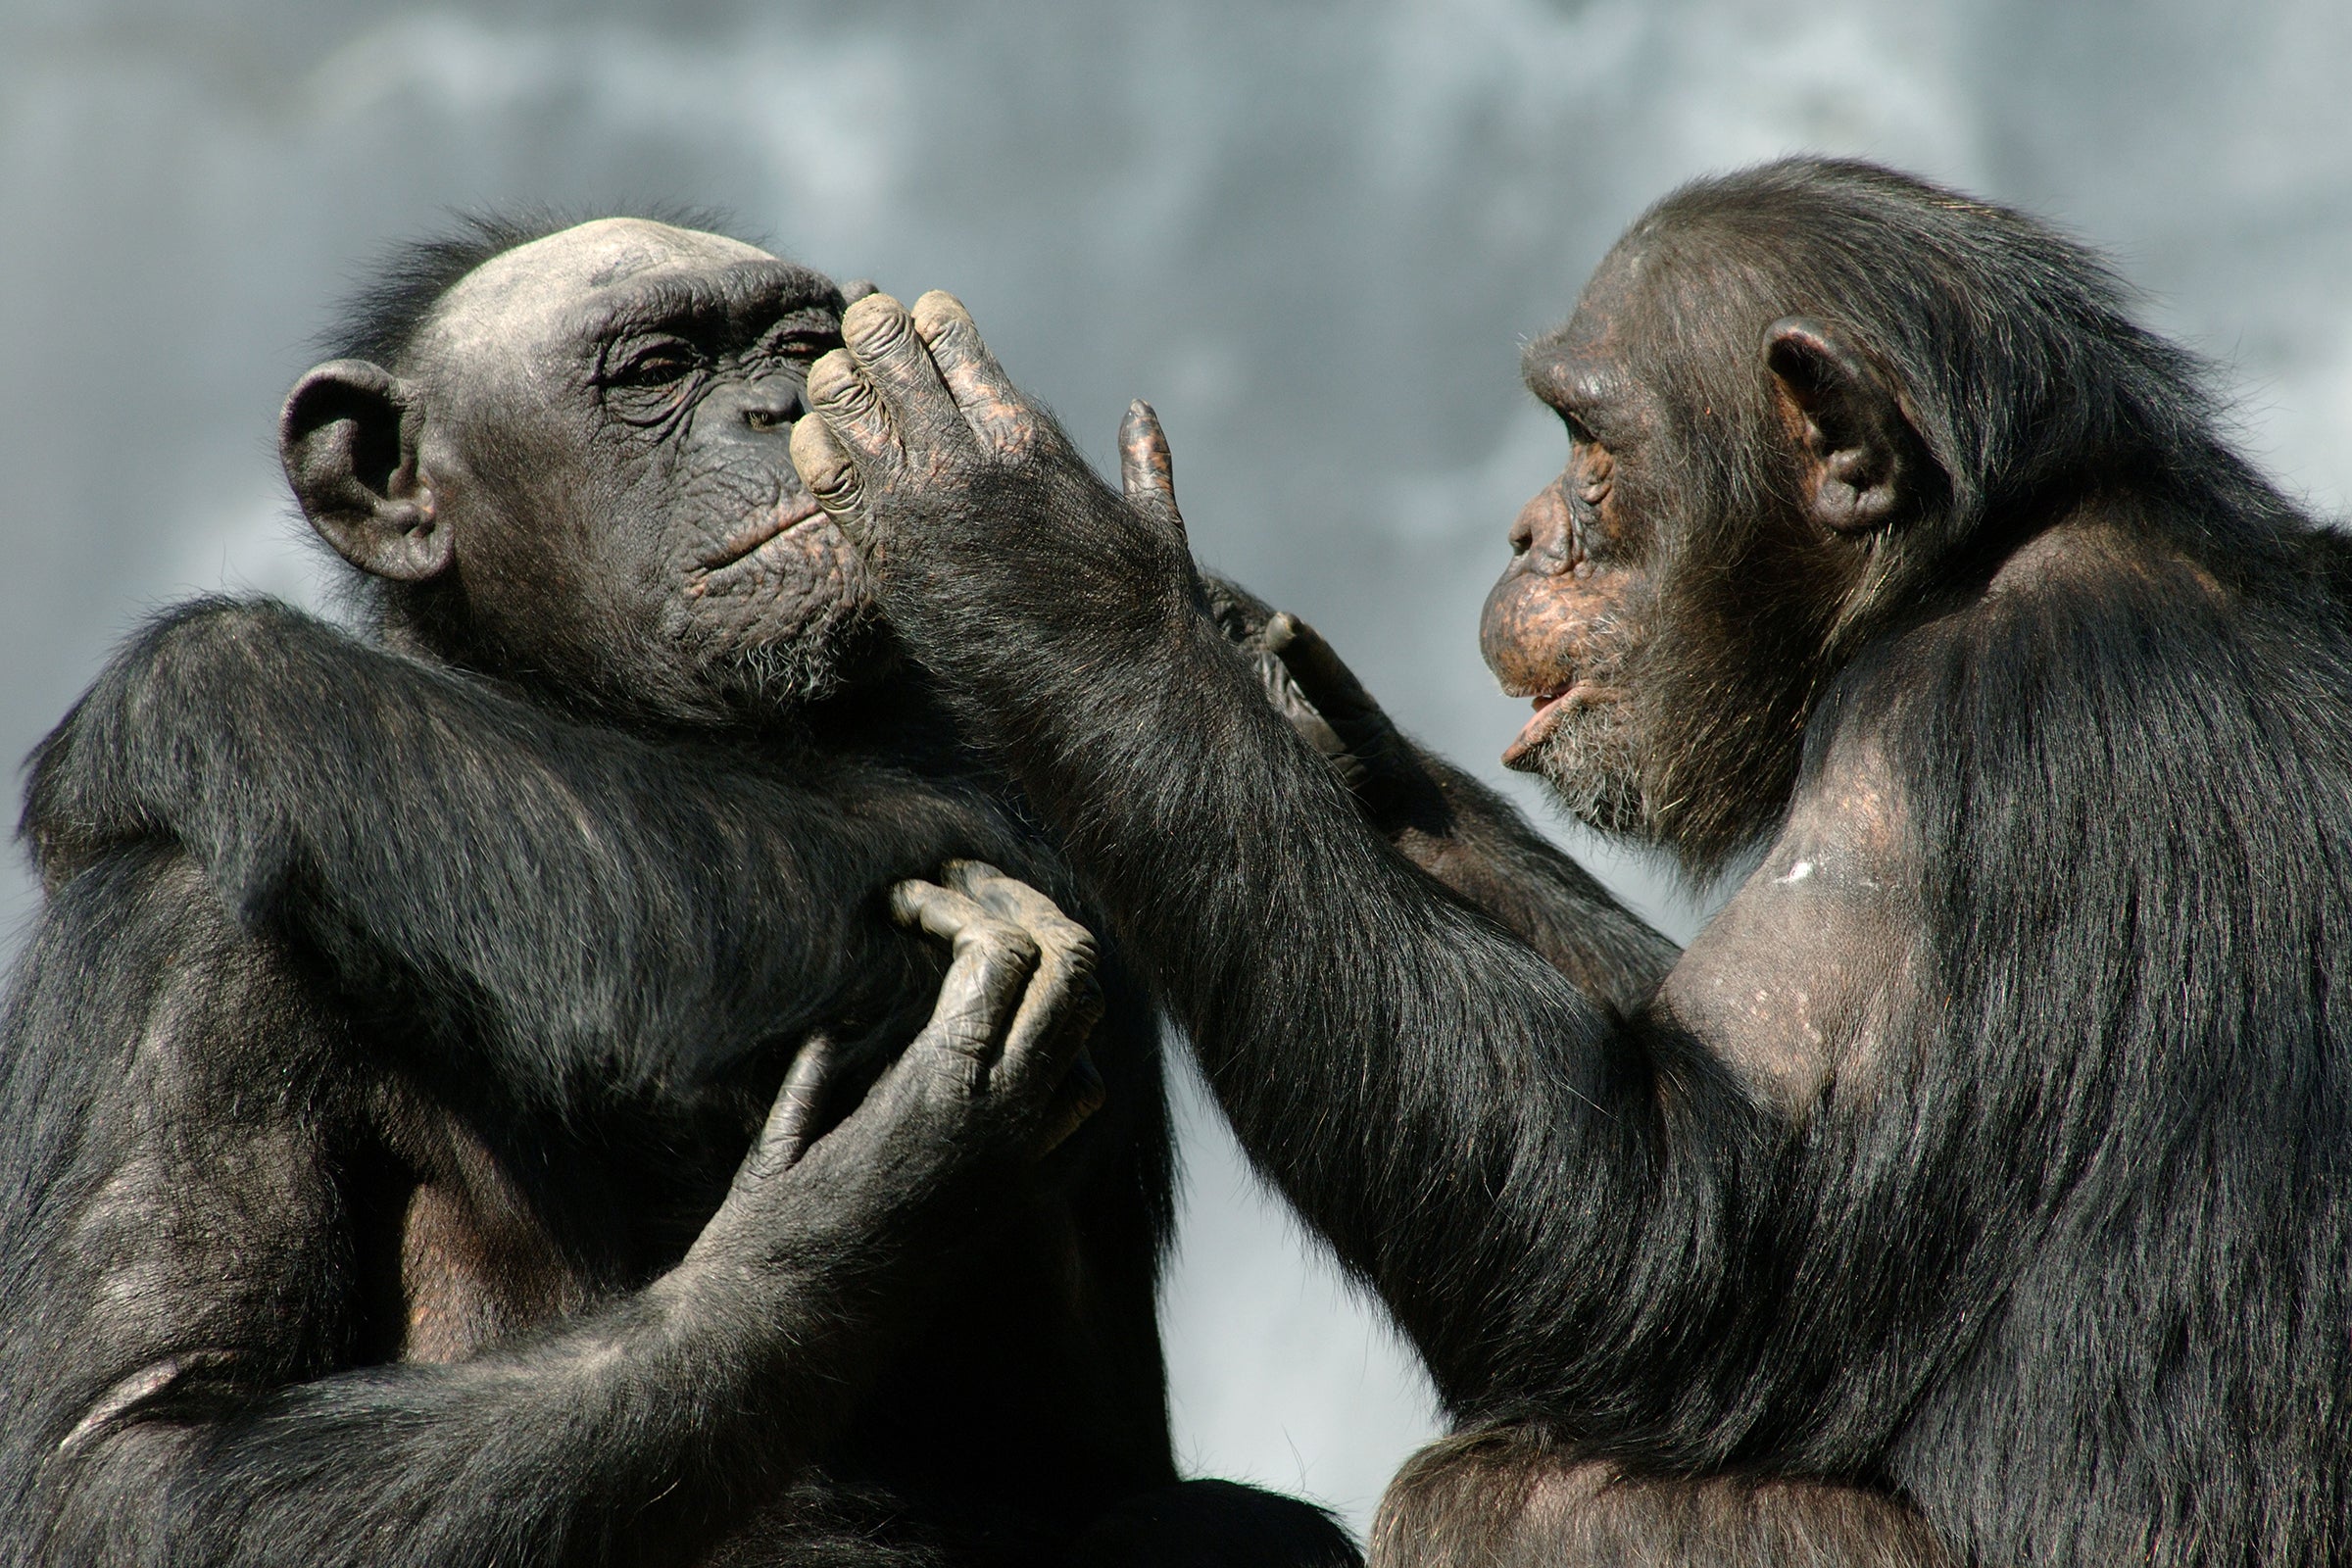 Humans Can Correctly Guess the Meaning of Chimp Gestures